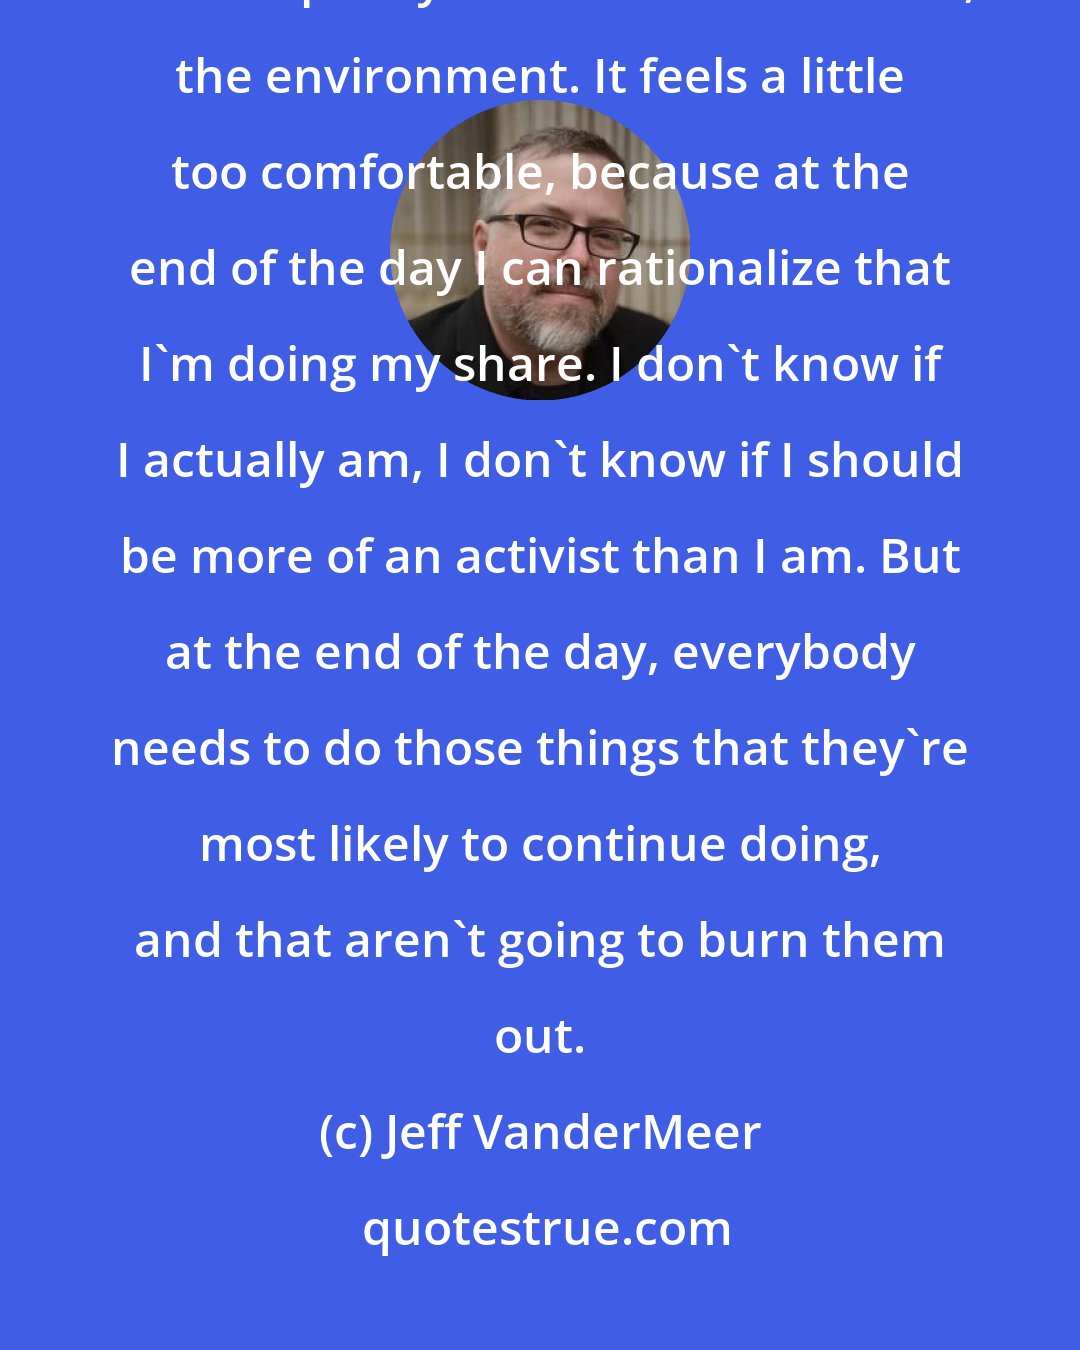 Jeff VanderMeer: I find myself in this bizarre position in which everything I write and talk about is pretty much about this issue, the environment. It feels a little too comfortable, because at the end of the day I can rationalize that I'm doing my share. I don't know if I actually am, I don't know if I should be more of an activist than I am. But at the end of the day, everybody needs to do those things that they're most likely to continue doing, and that aren't going to burn them out.